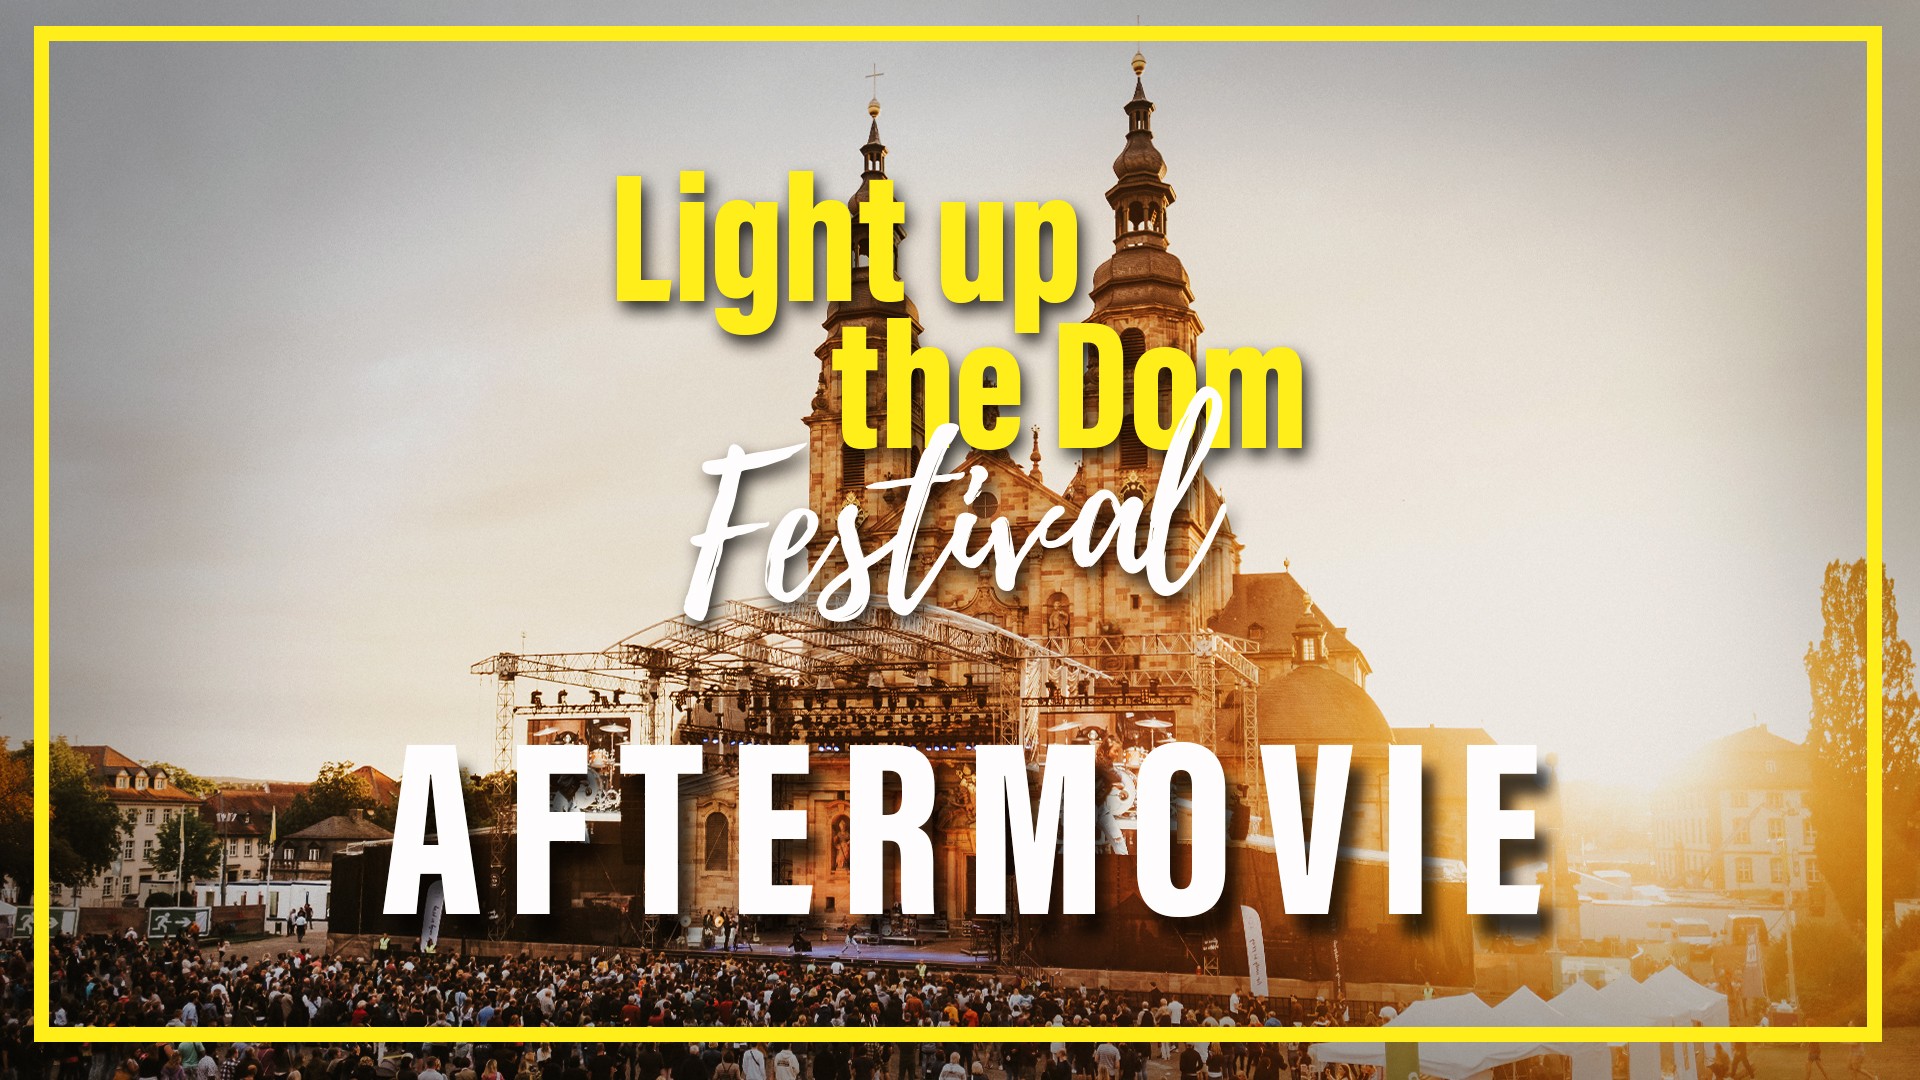 ALL FOR ONE | Light up the Dom Festival